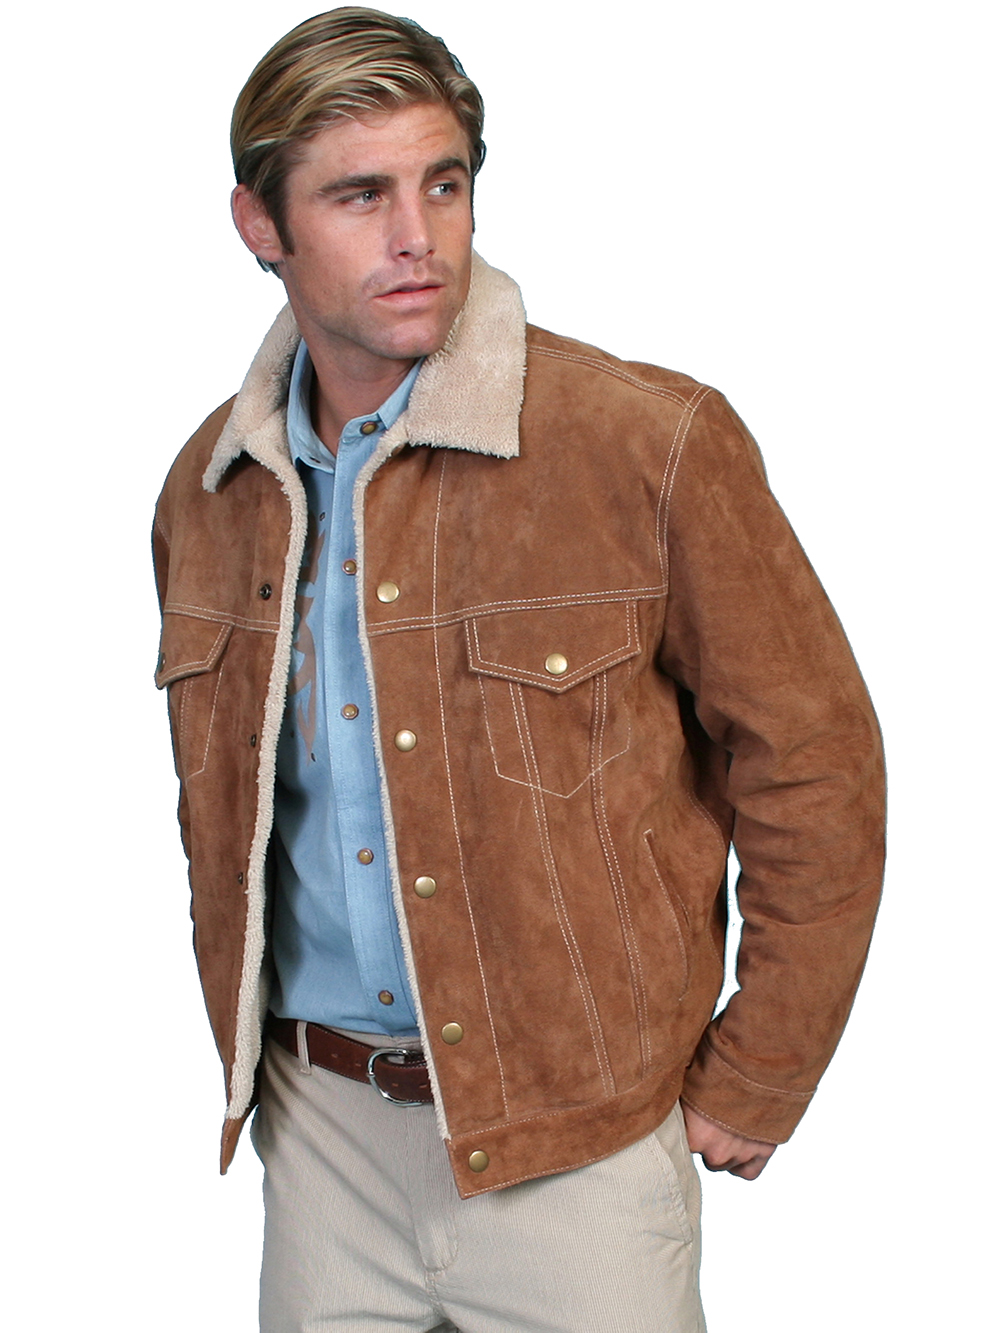 Pungo Ridge - Scully Men's Boar Suede Jean Jacket - Cafe Brown, Scully ...